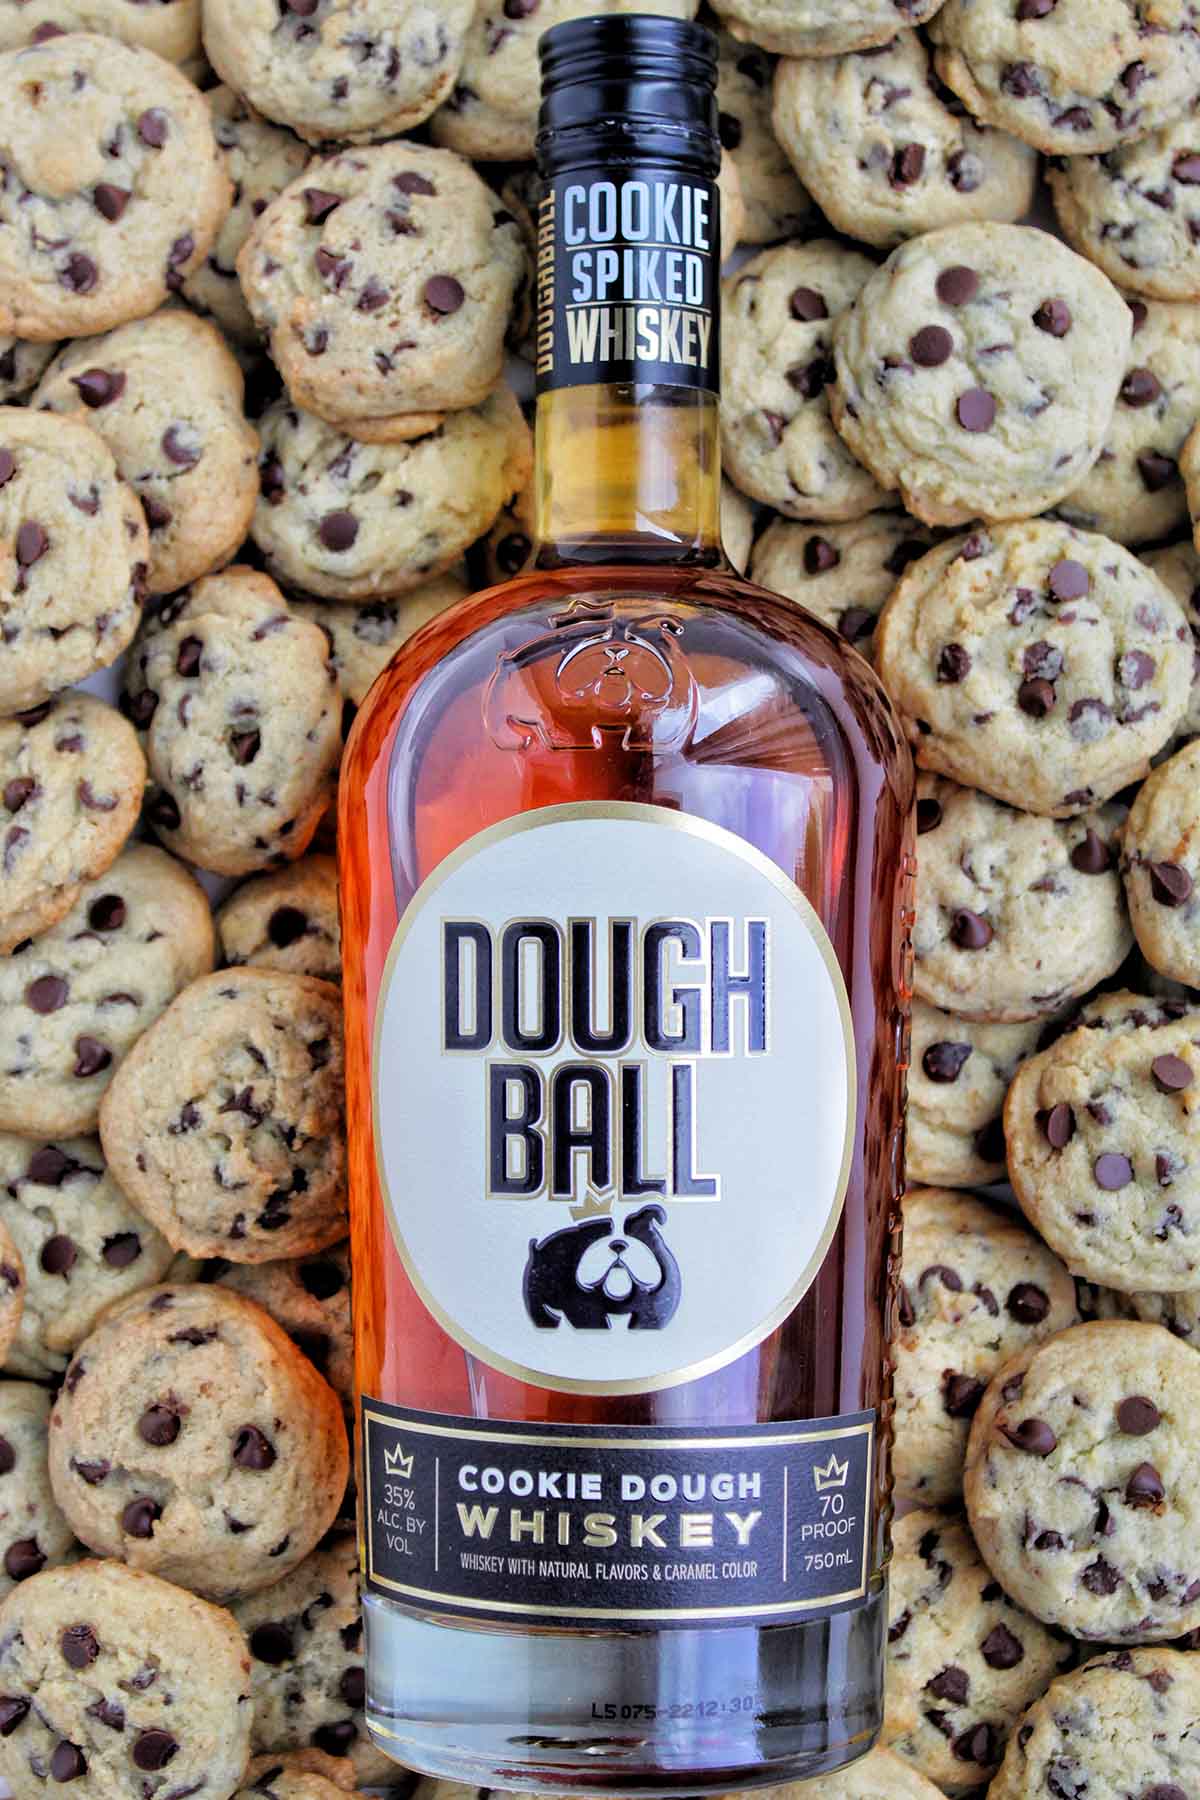 Dough Ball whiskey cocktail bottle on top of chocolate chip cookies.